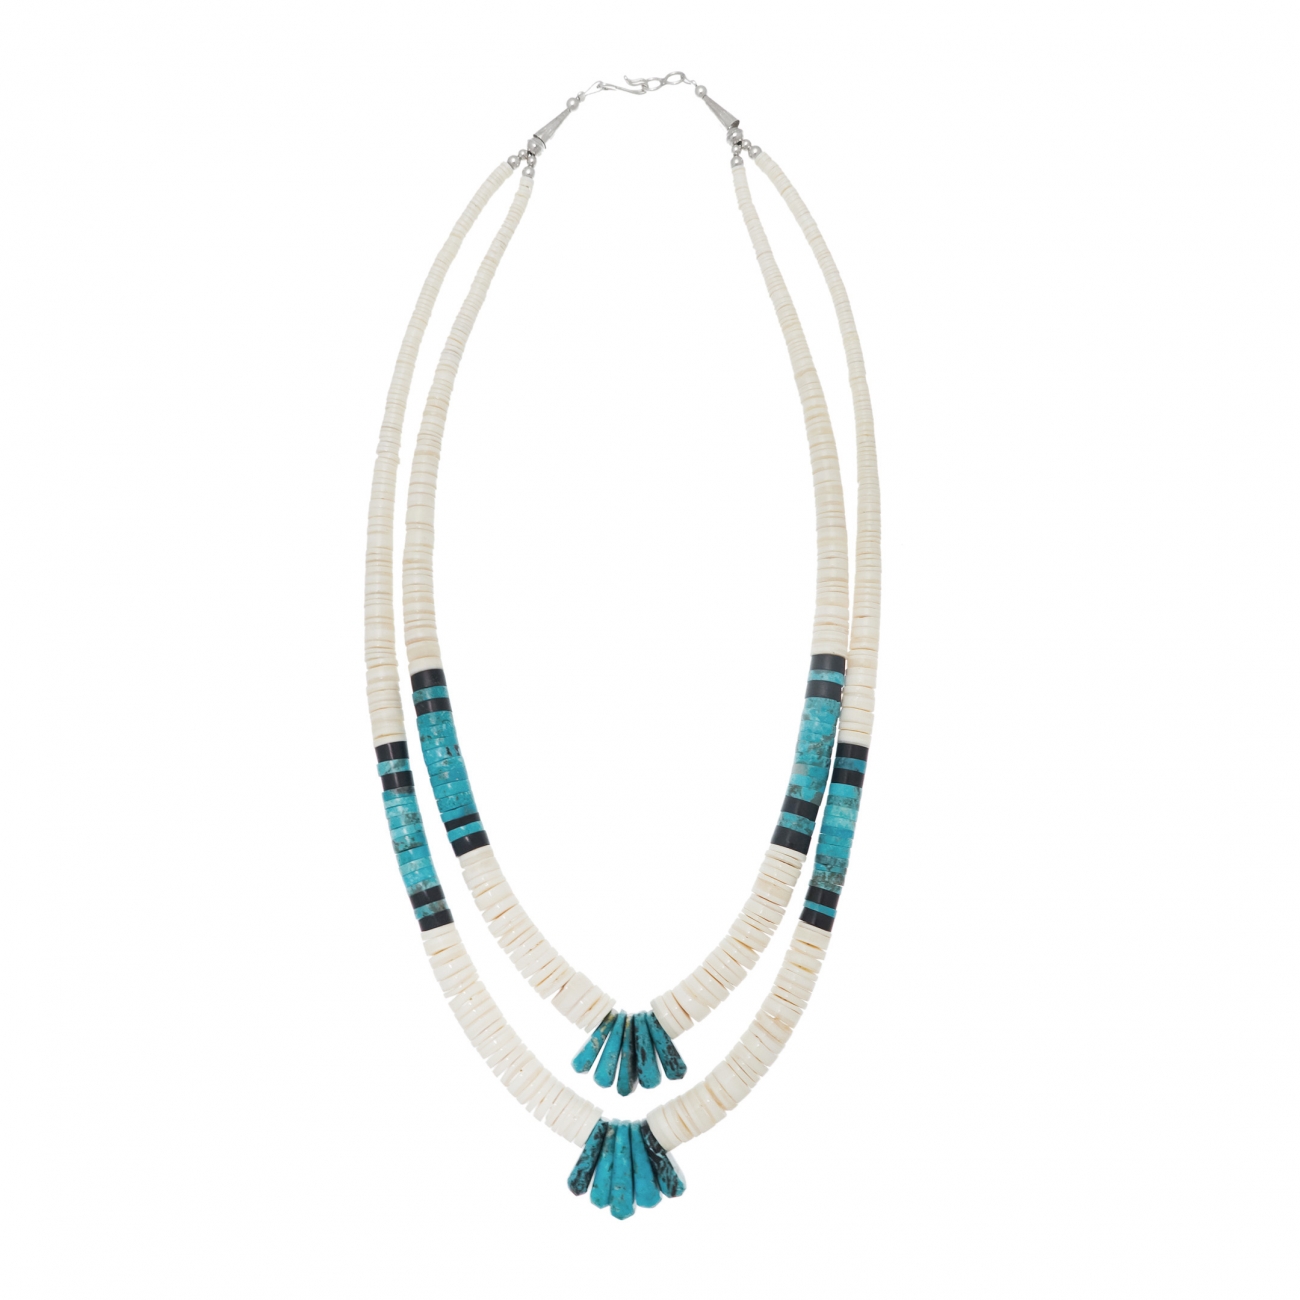 CO130 Harpo heishi beads necklace turquoise and shell